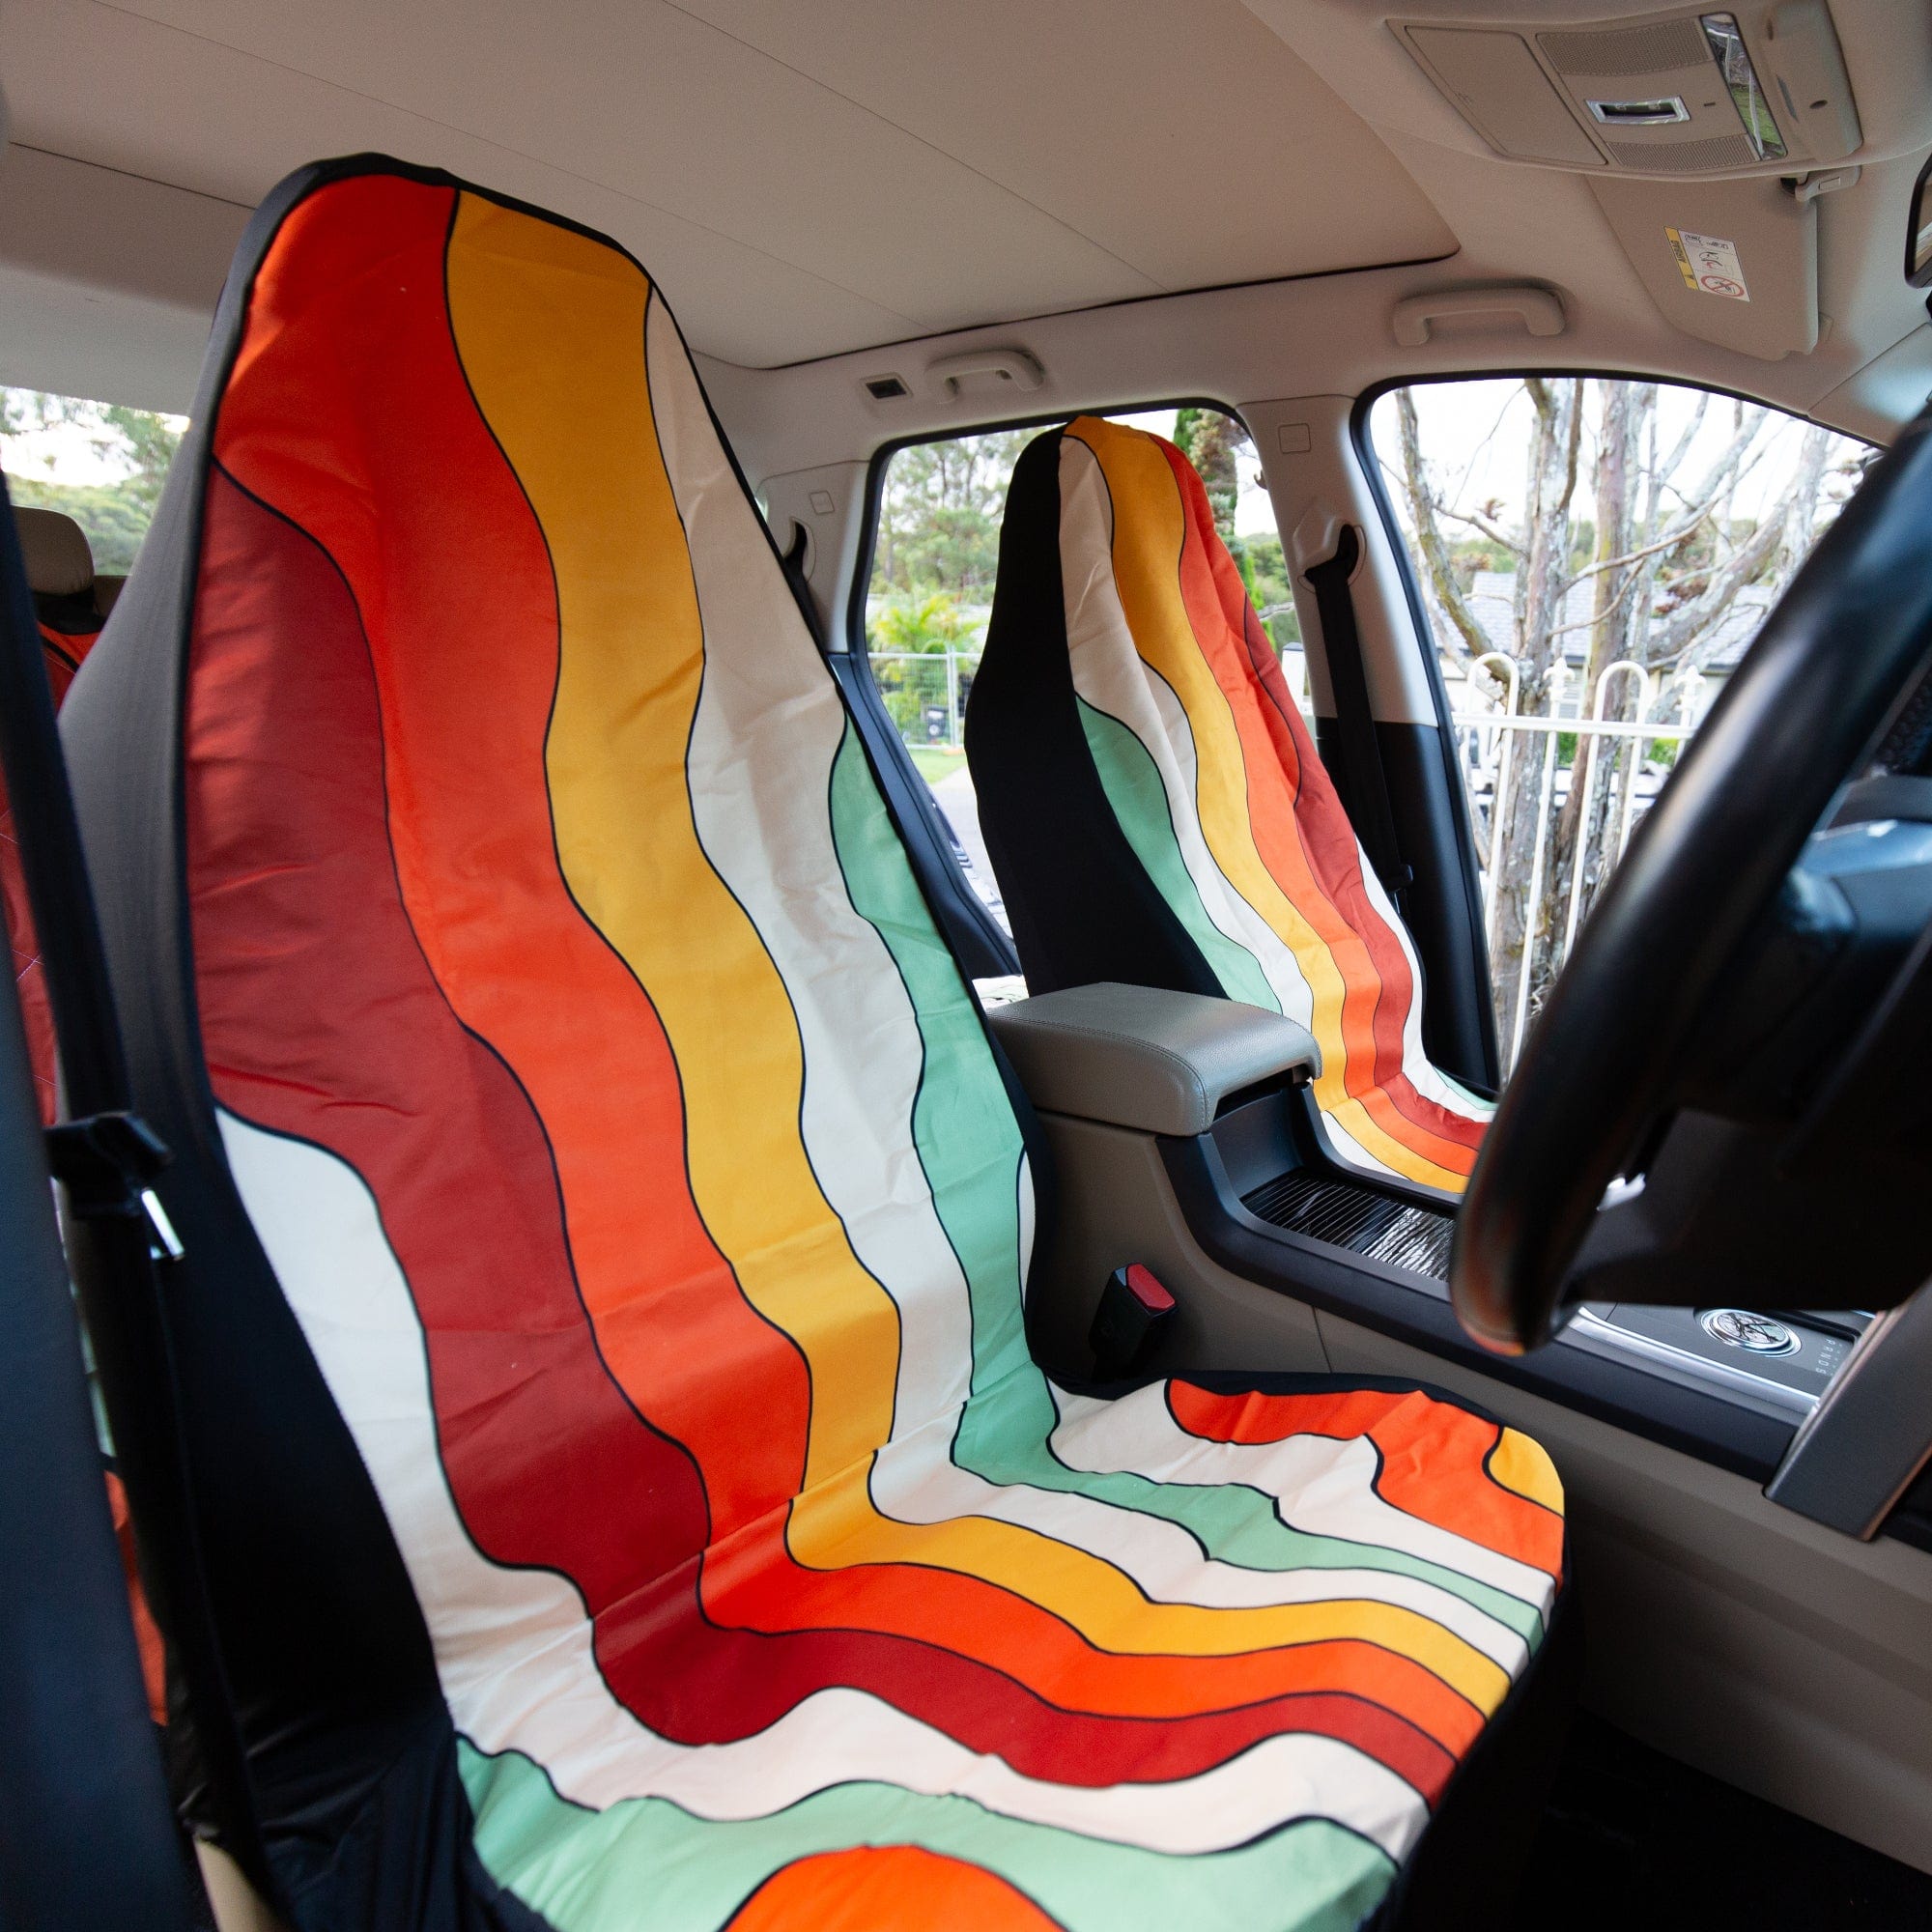 Stay Groovy Flower Car Seat Covers for Vehicle Set of 2 Front, Psychedelic  Car Decor, Boho Cute Aesthetic, Retro Wavy Girl Car Accessories 